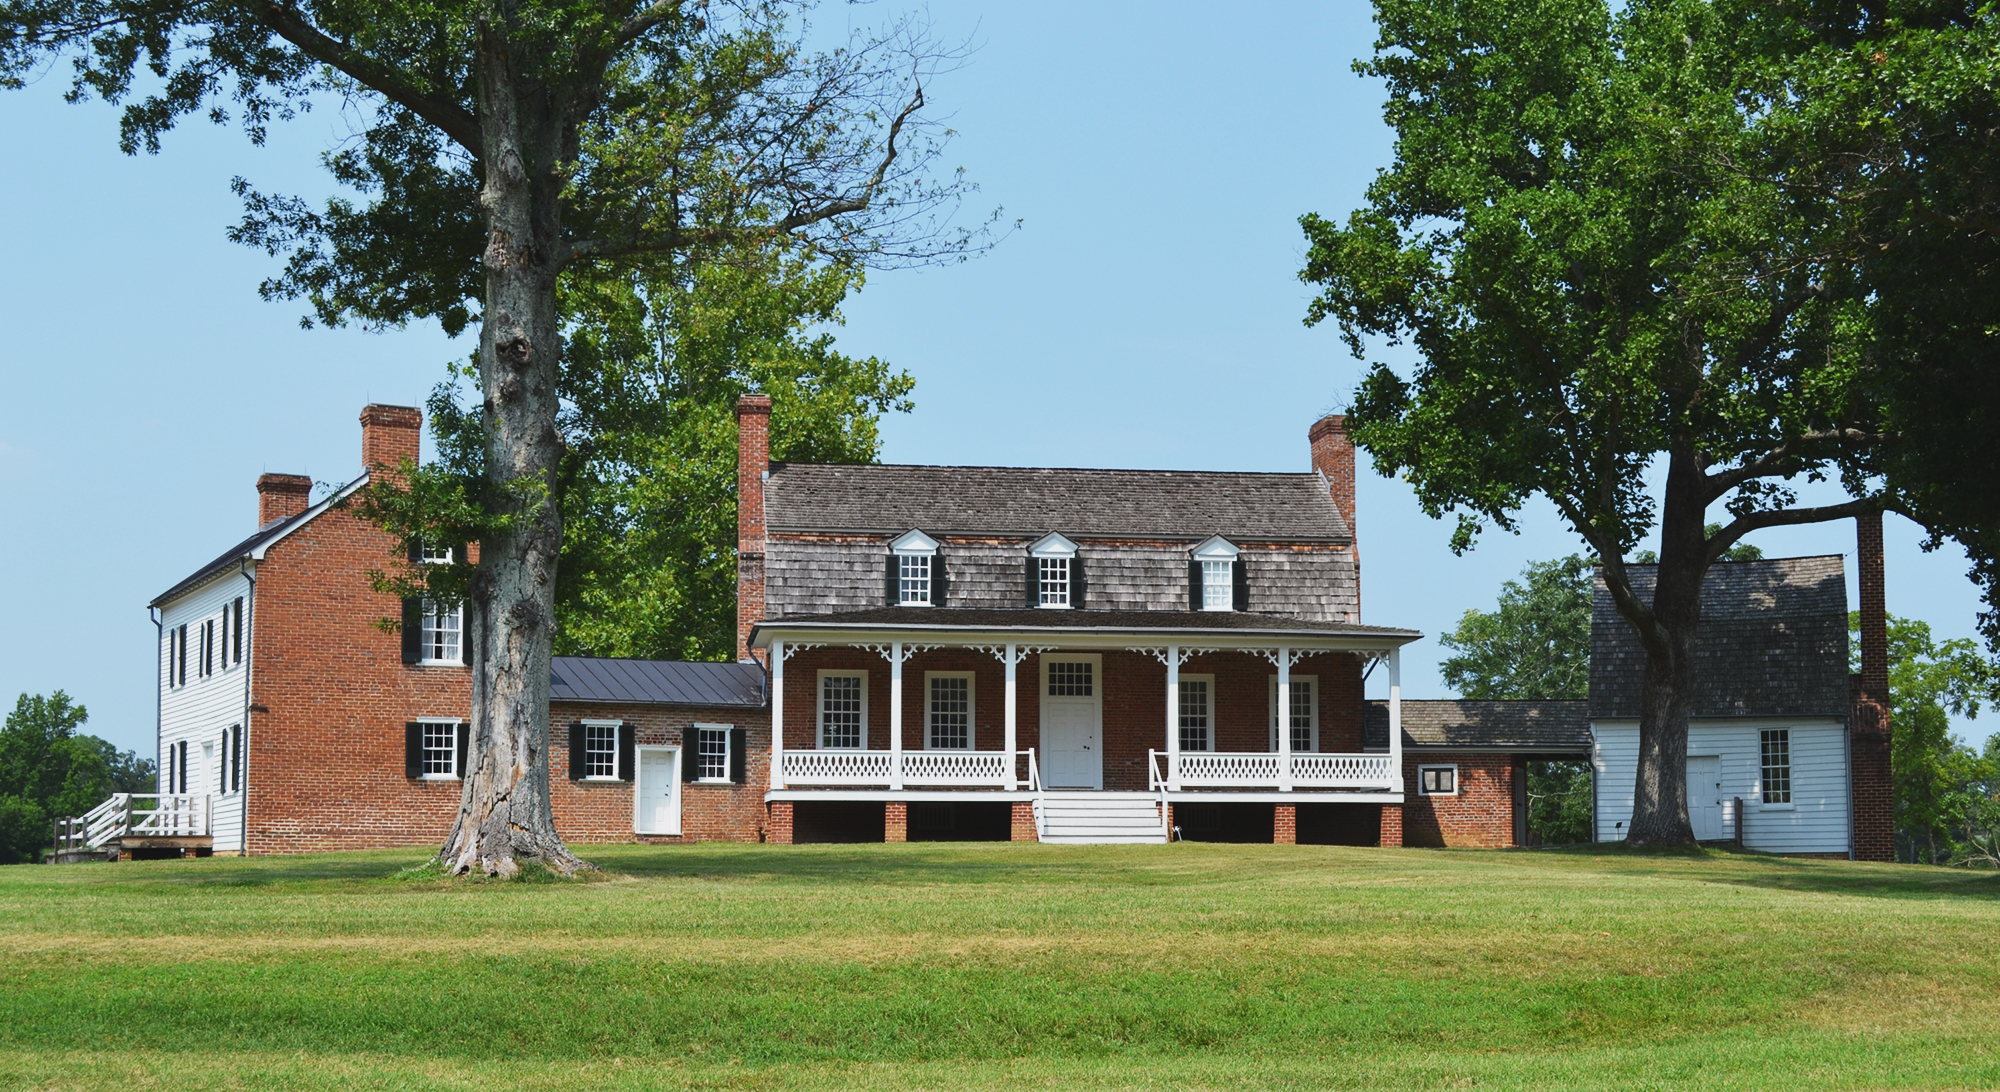 Thomas Stone National Historic Site is the home to a signer of the Declaration of Independence